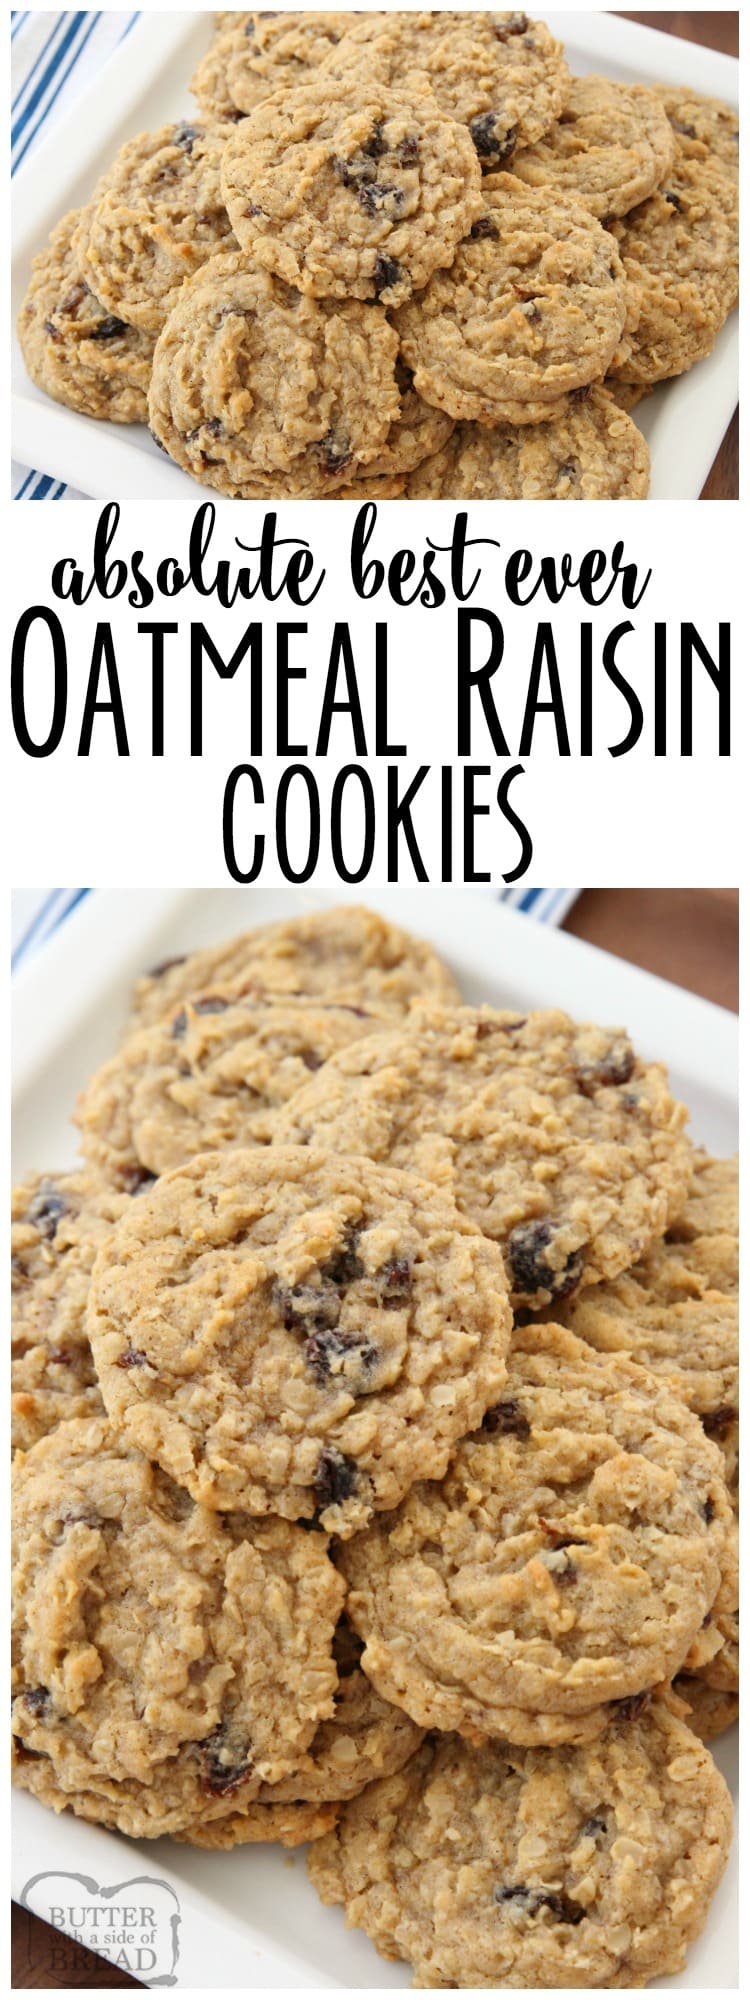 Oatmeal Raisin Cookies that truly are the BEST EVER! #Oatmeal, #raisins, pudding mix & spices combine in the most delicious, soft & chewy Oatmeal Raisin #Cookies from Butter With A Side of Bread